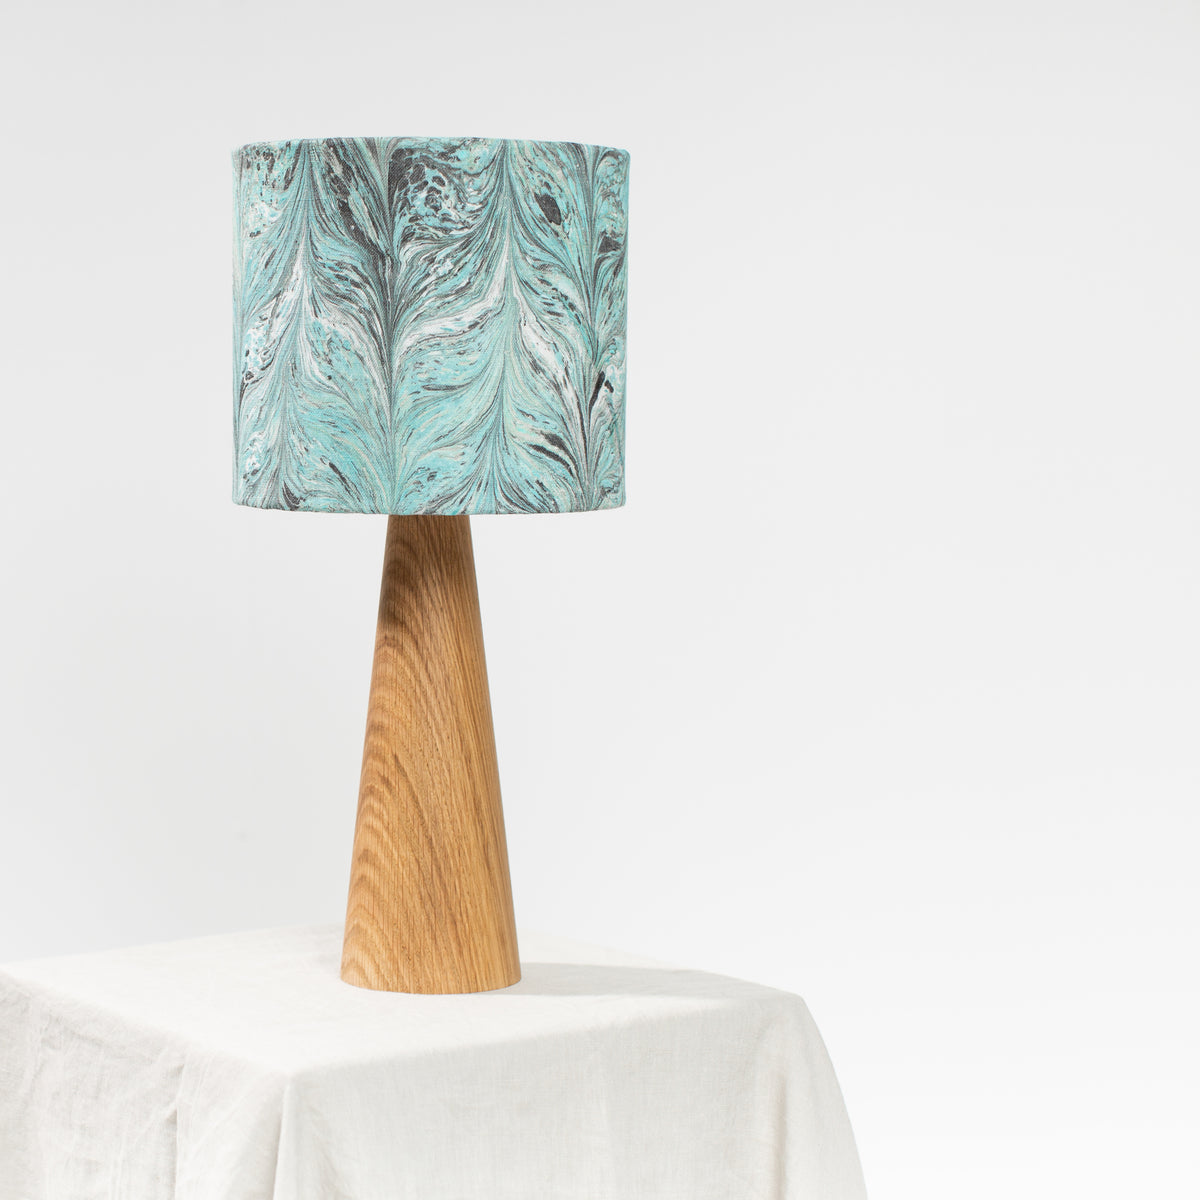 Linen lampshade on Oak wooden base on a linen table top and white background.  Marbling Chevron pattern in teal and dark green.